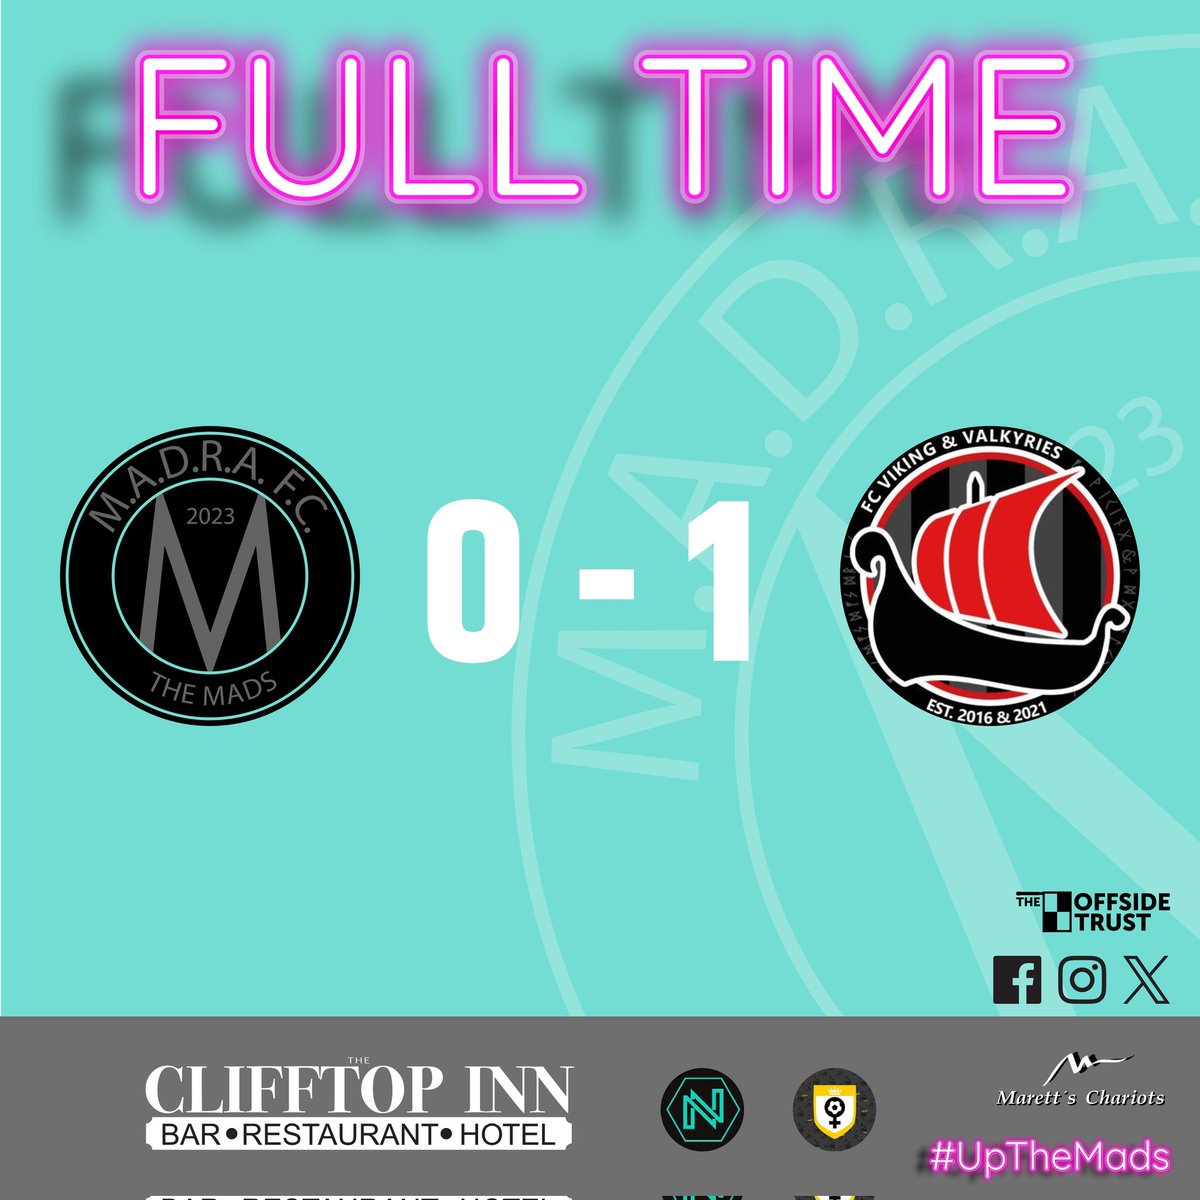 Womens team lose by just 1 goal to the undefeated league leaders.
#UpTheMads #WelcomeToTheMadhouse #Madness #TheMads #MadraFC #NorfolkFootball #OneStepBeyond